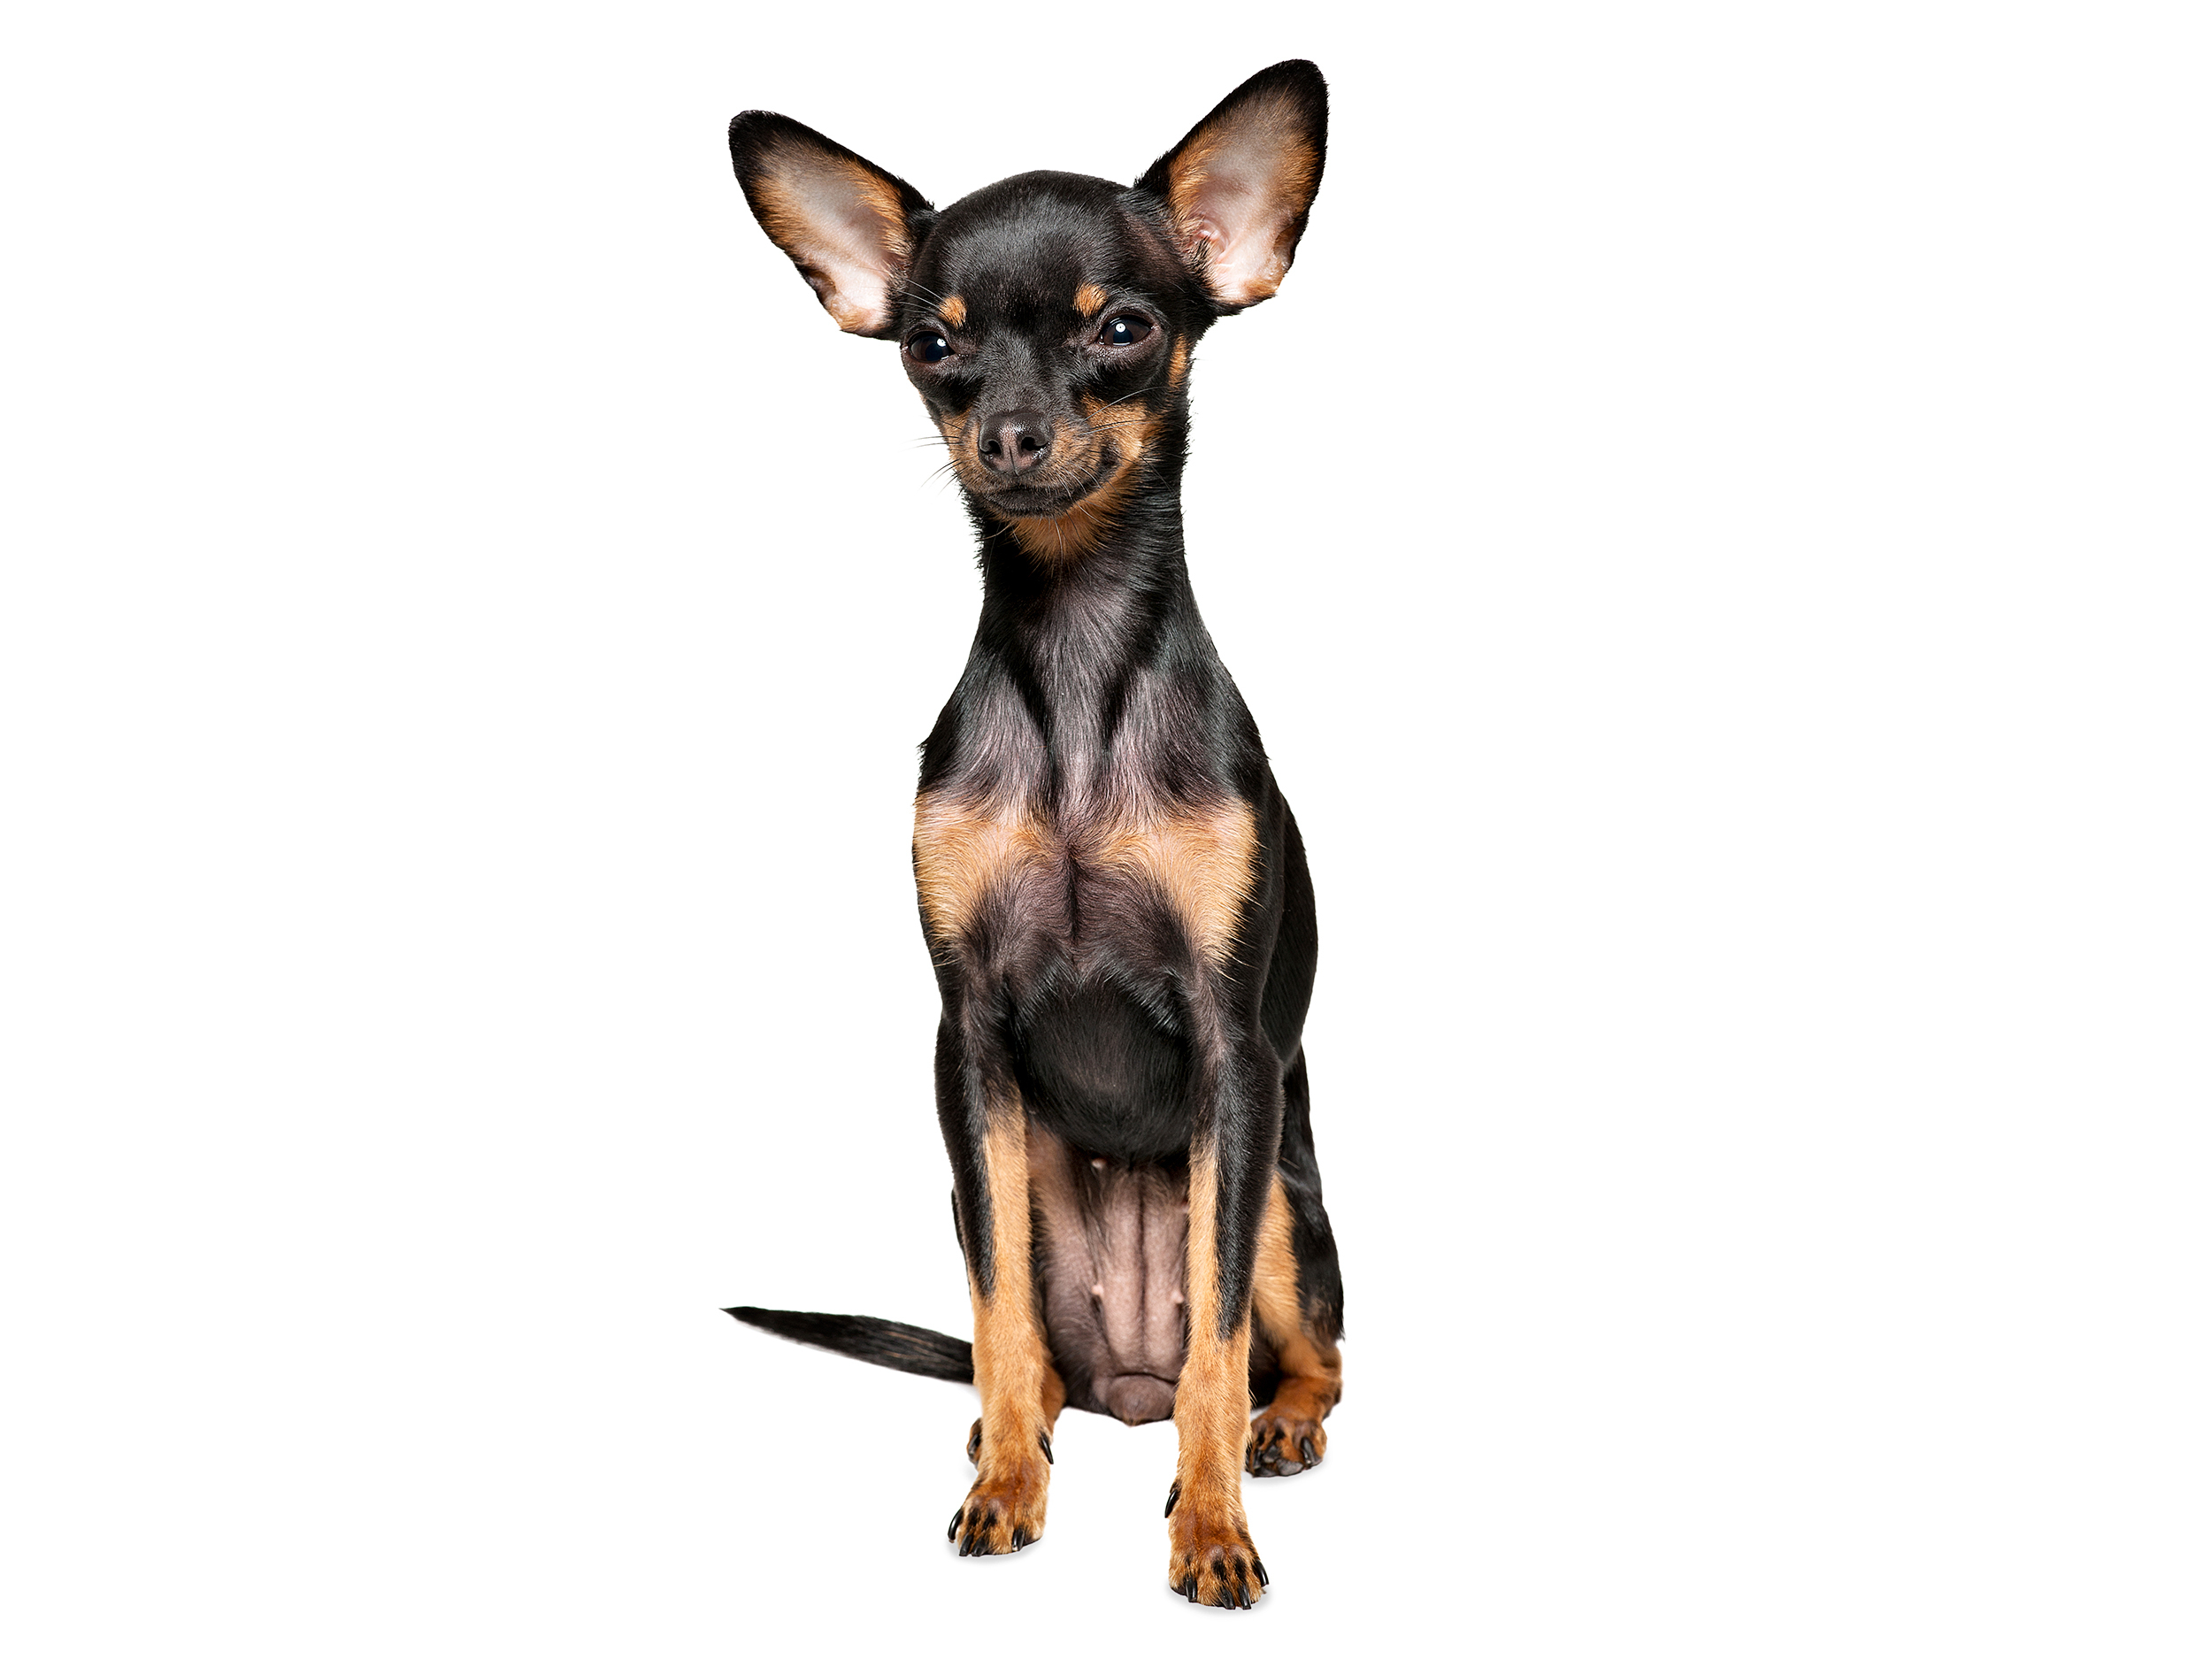 English Toy Terrier in black and white on a white background